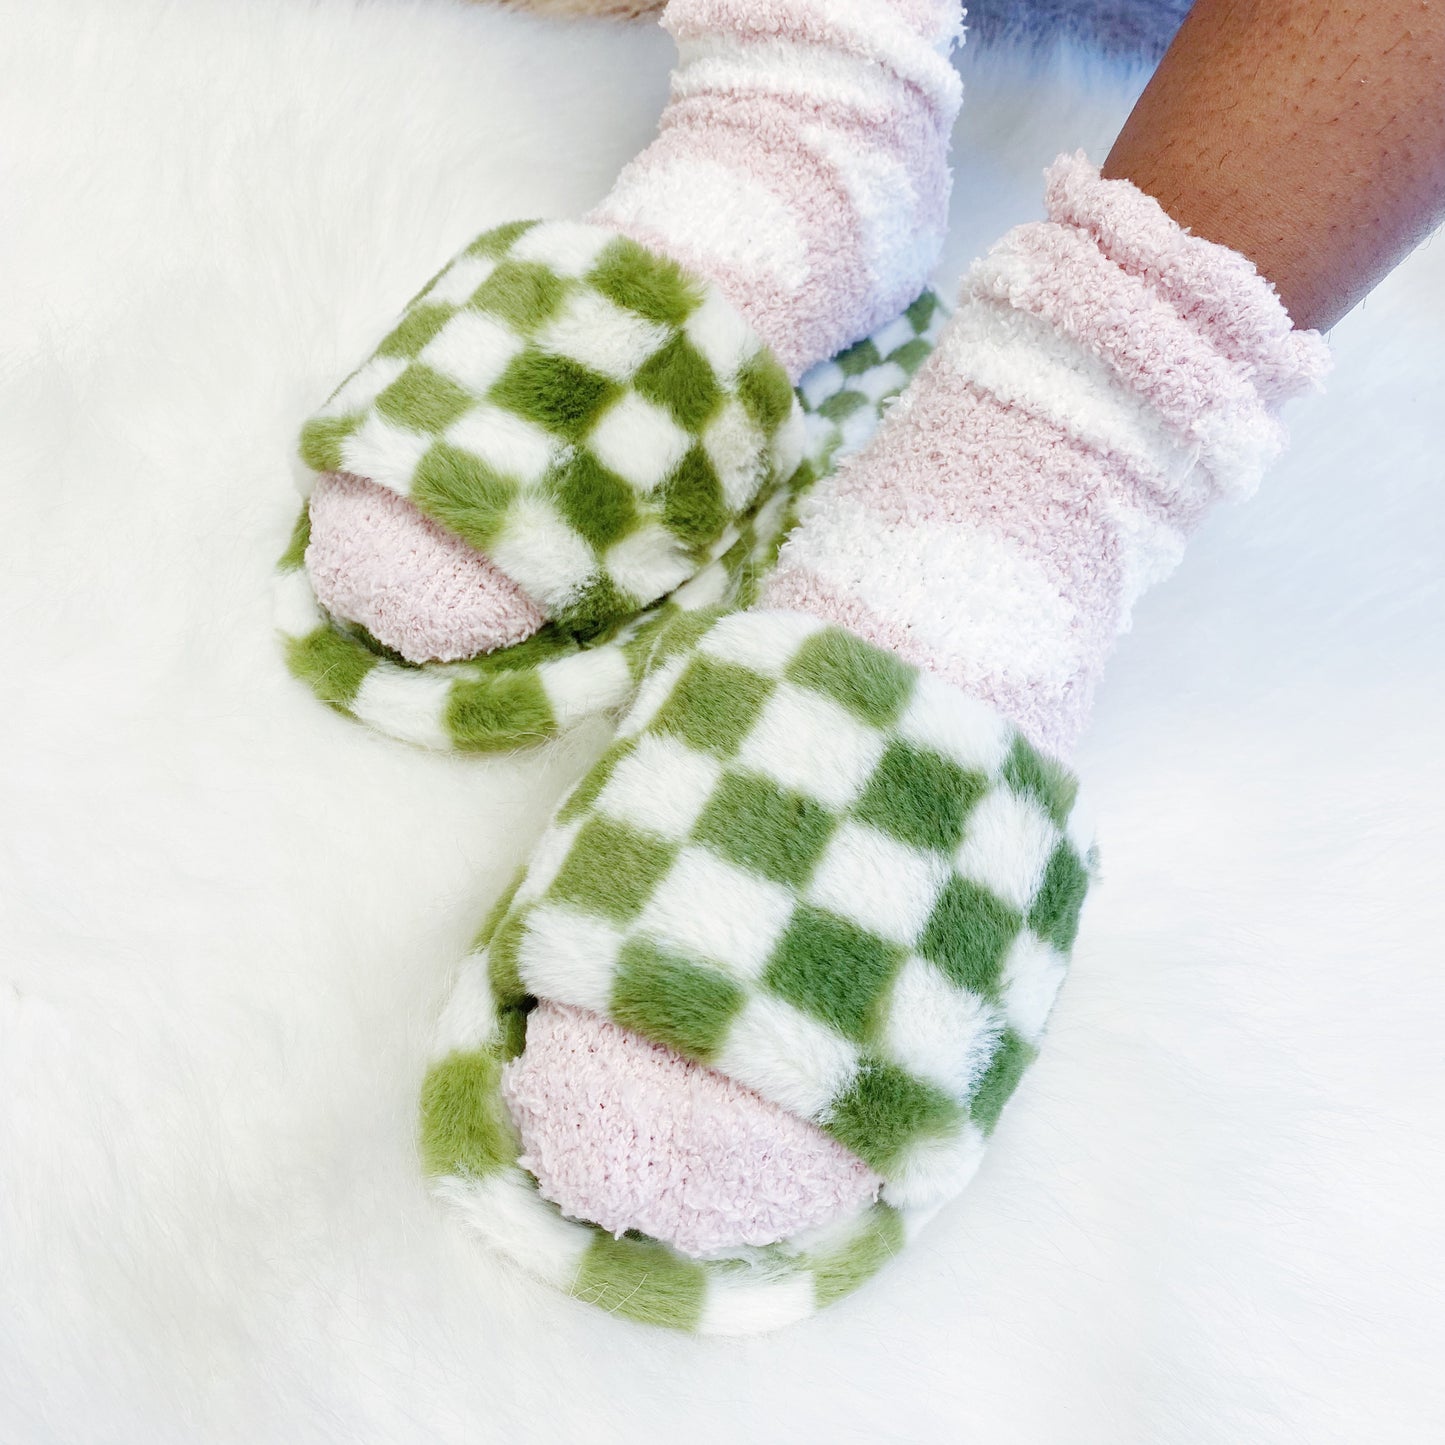 Checkered Cloud Comfort Slippers